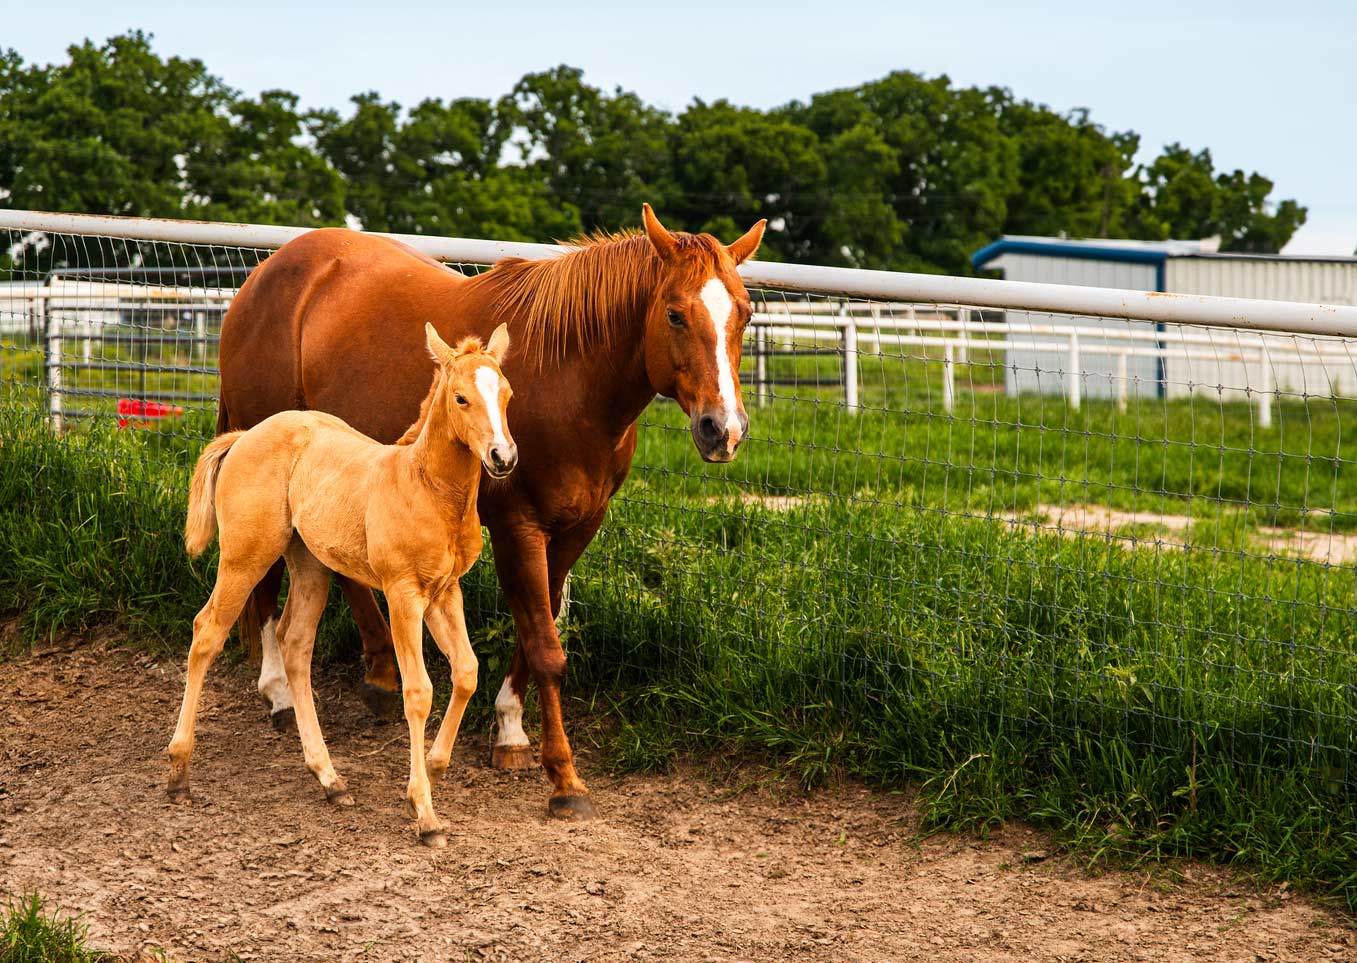 A mother horse walking with her foal.